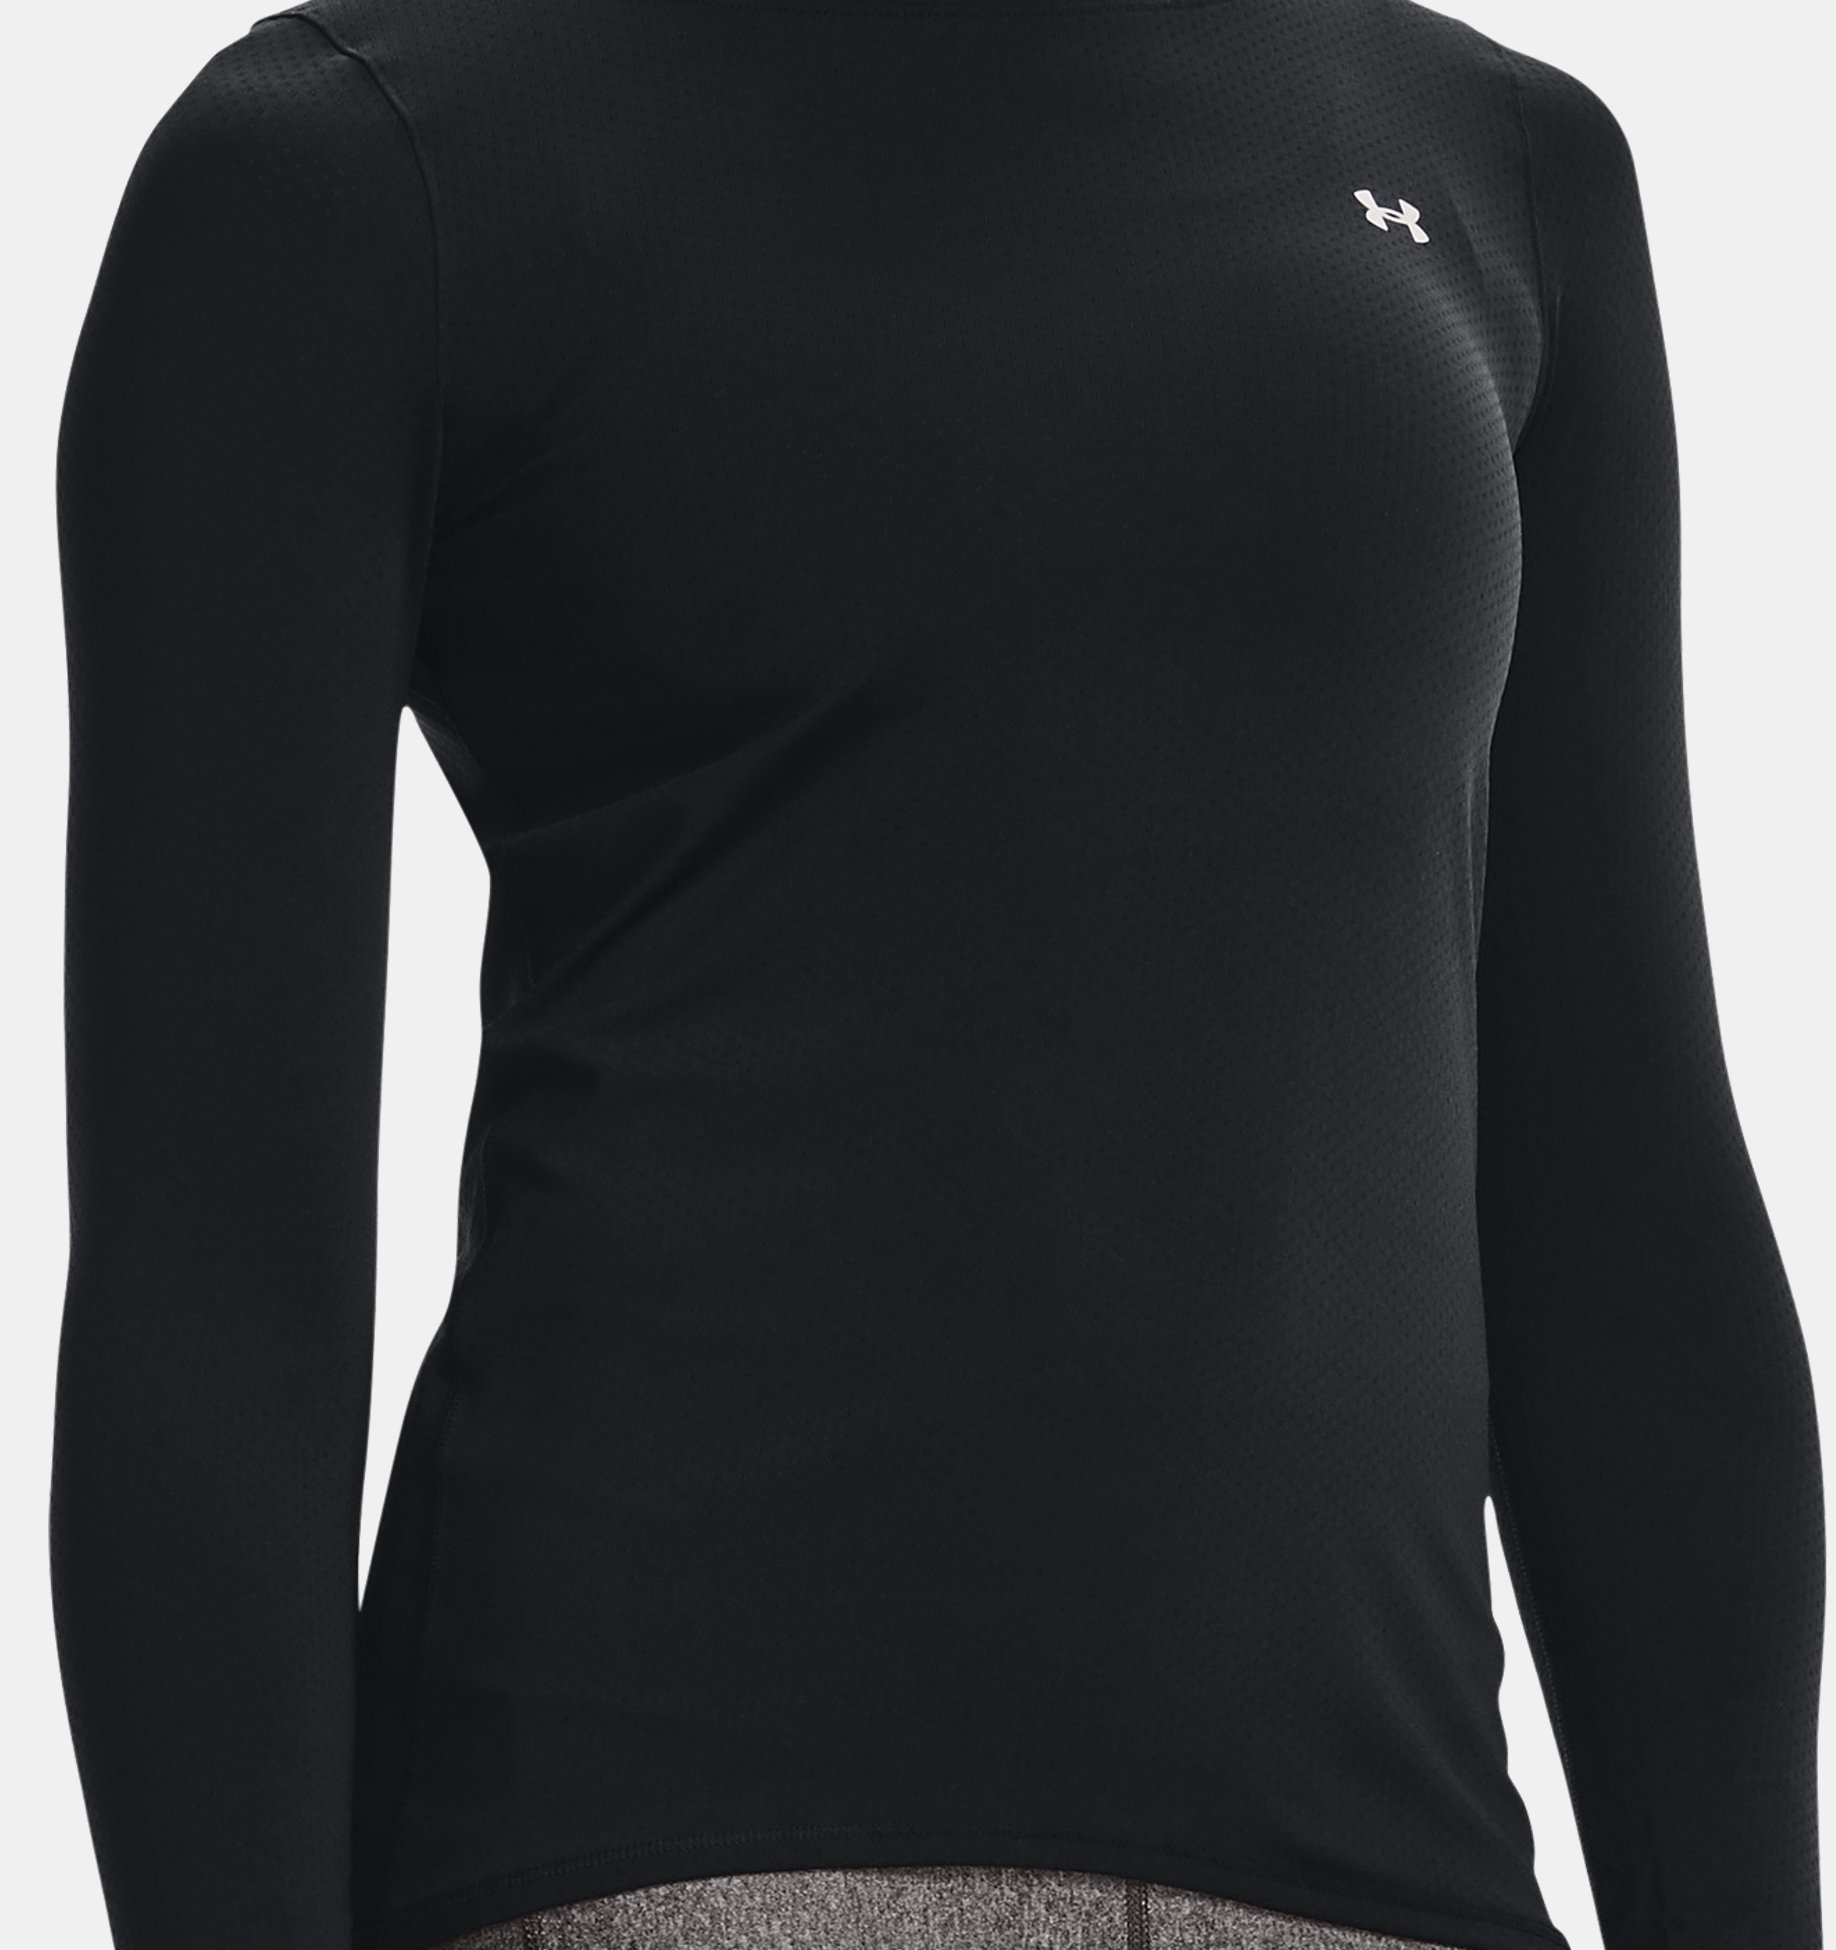 https://underarmour.scene7.com/is/image/Underarmour/V5-1328966-001_FC?rp=standard-0pad|pdpZoomDesktop&scl=0.72&fmt=jpg&qlt=85&resMode=sharp2&cache=on,on&bgc=f0f0f0&wid=1836&hei=1950&size=1500,1500